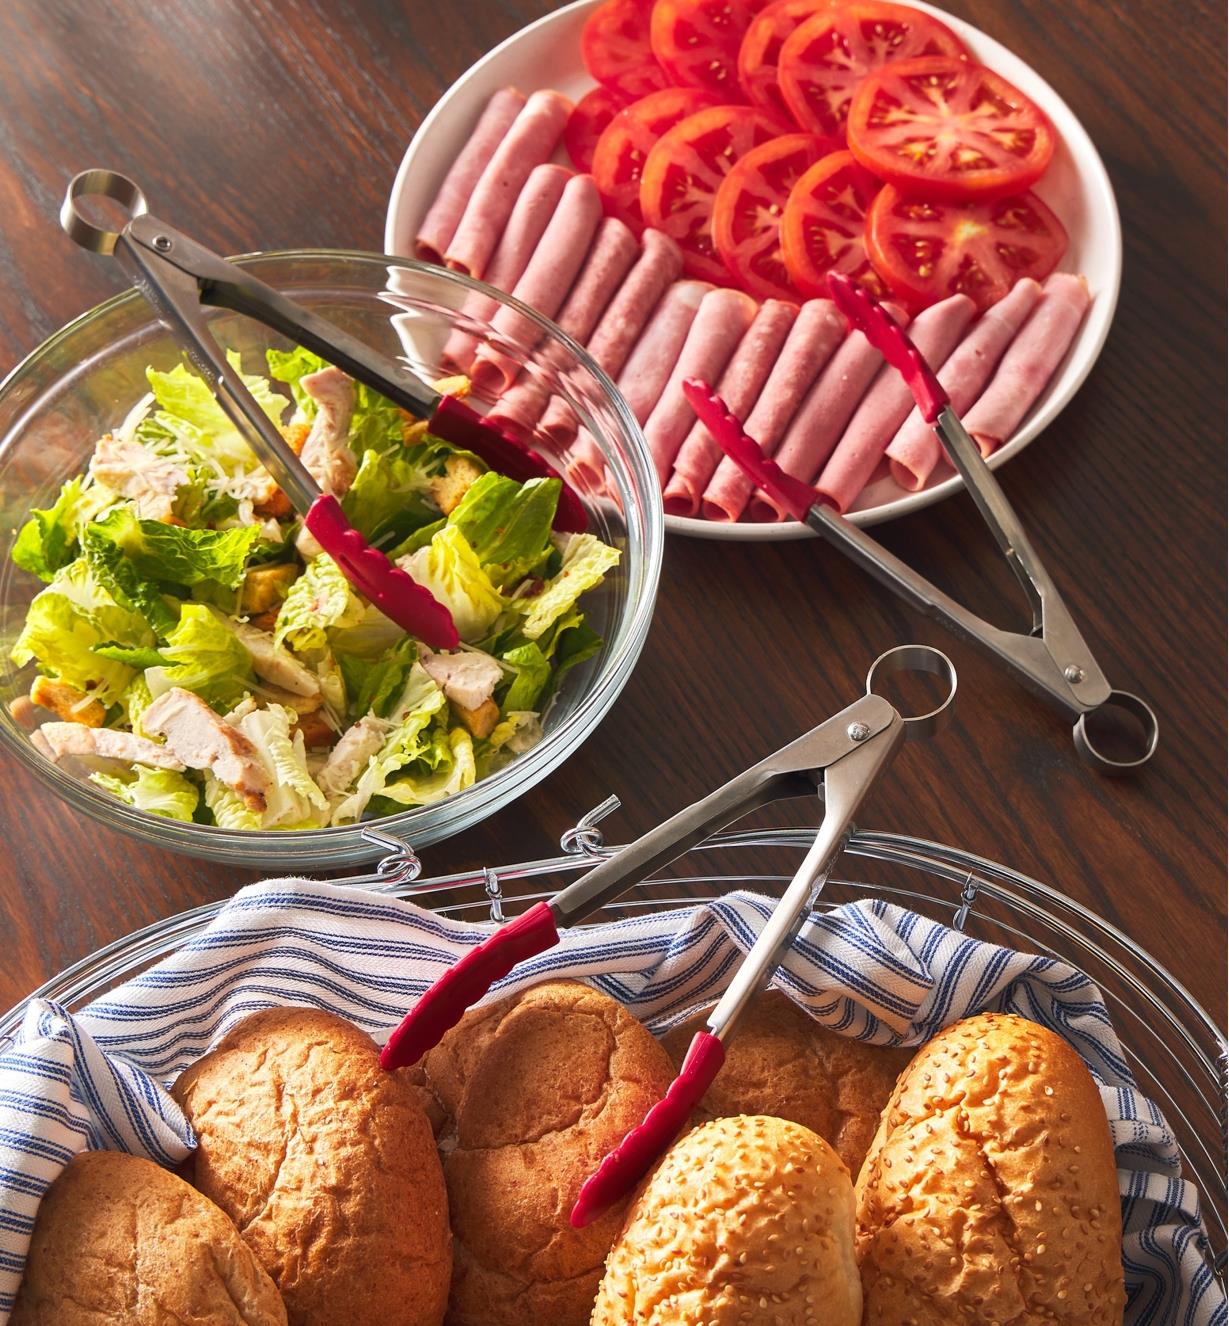 Tongs placed with rolls, a salad and a plate of meat and tomatoes